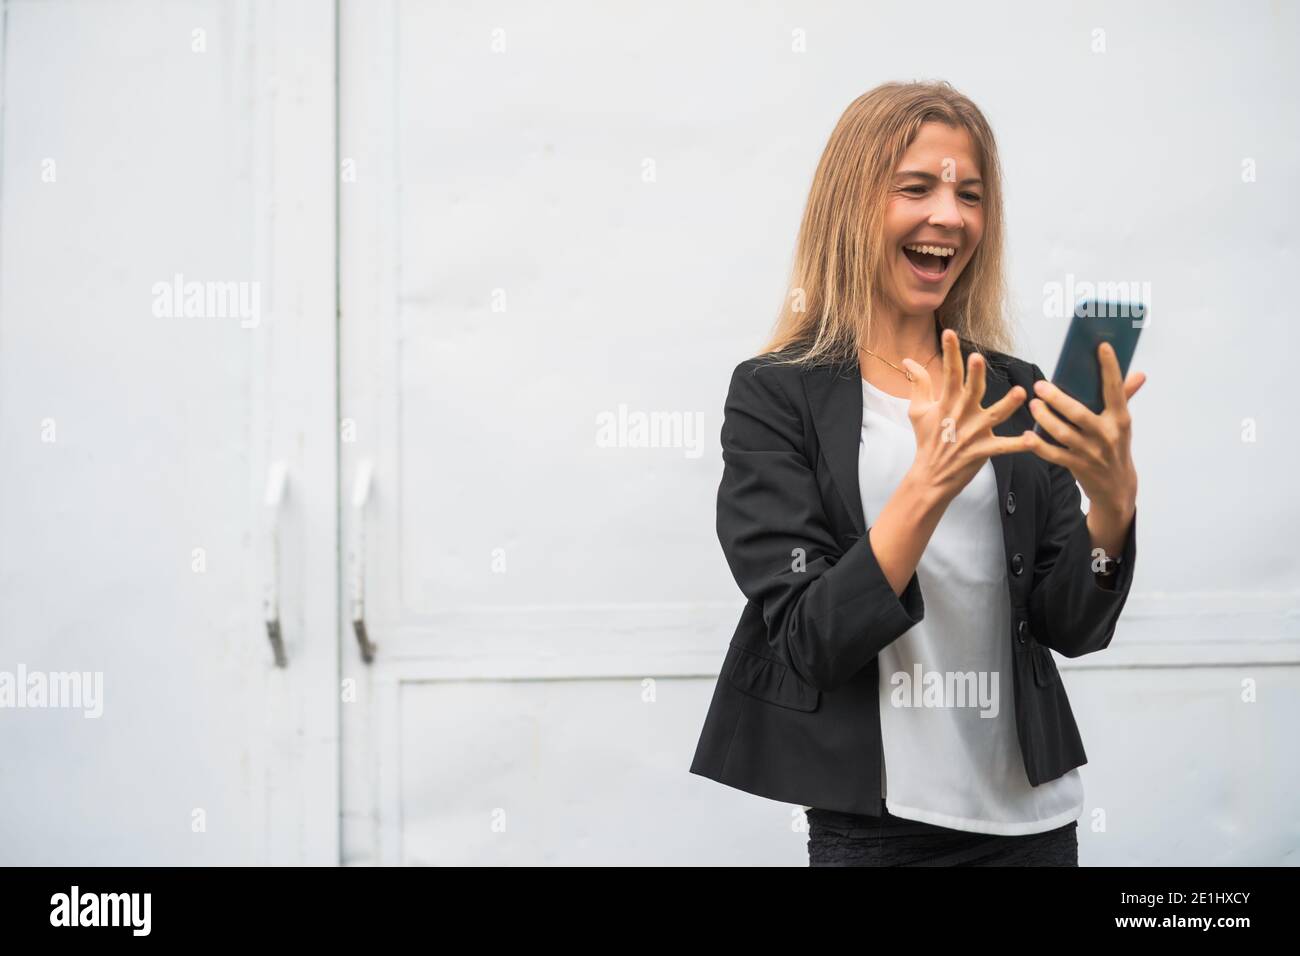 Outdoor portrait of ecstatic modern businesswoman who is joyful. She is holding smartphone. Stock Photo